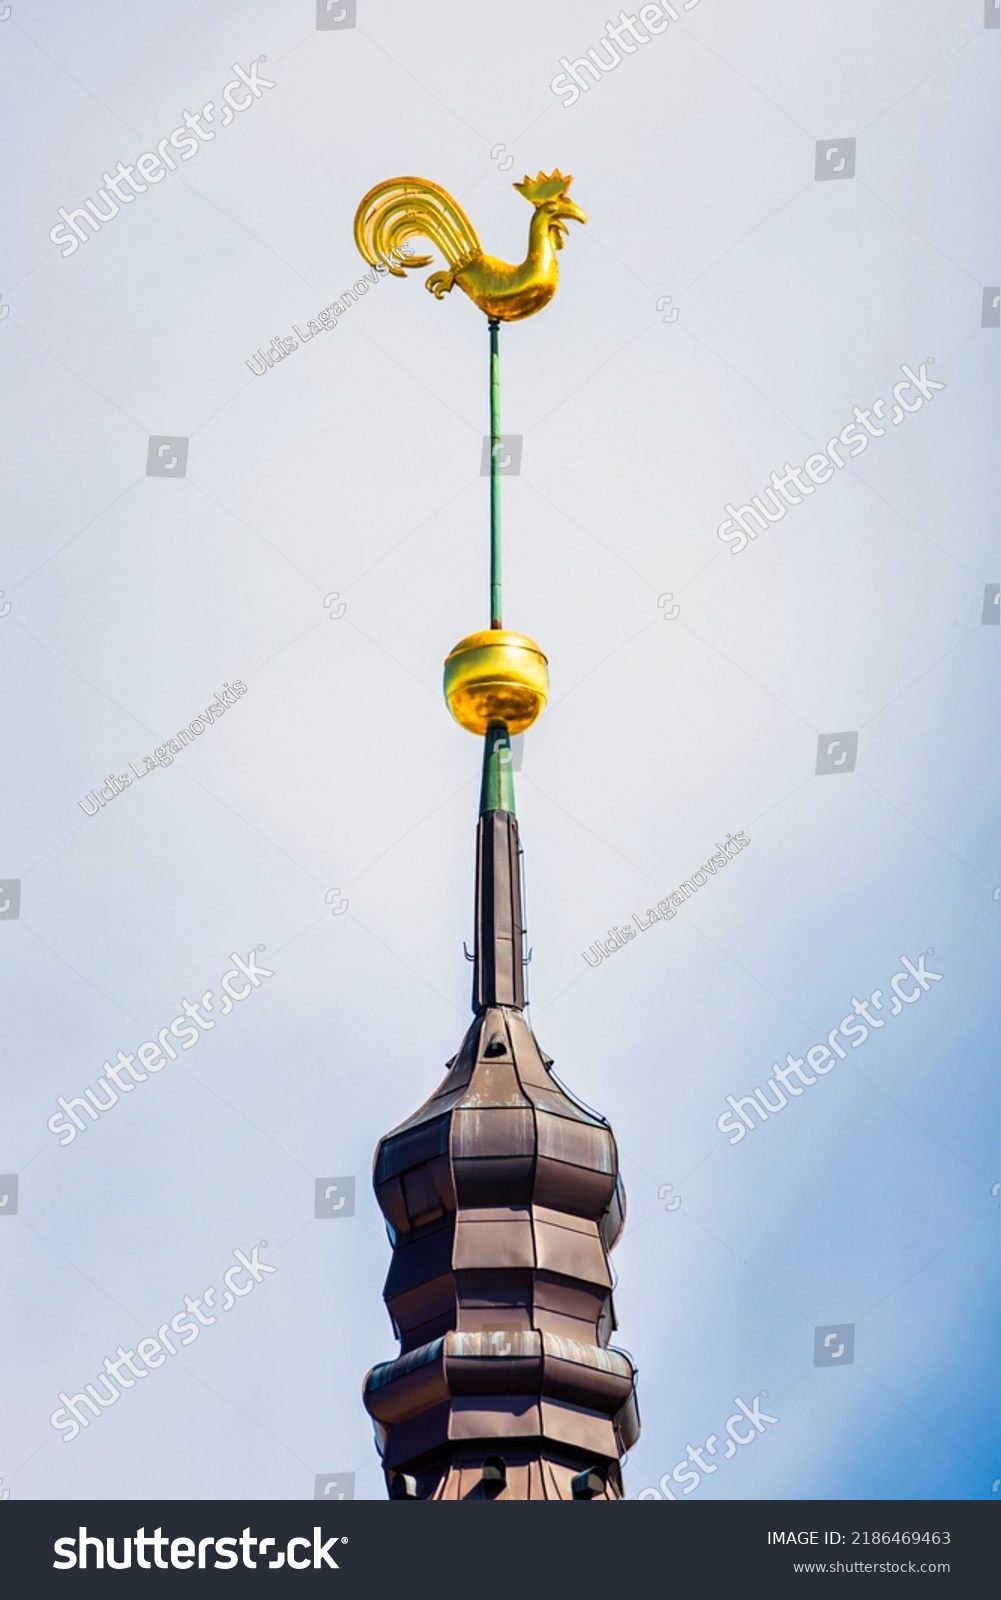 Symbol of old Riga town in Latvia - golden cockerel (rooster) topping bell tower of Riga Doms Cathedral. #2186469463